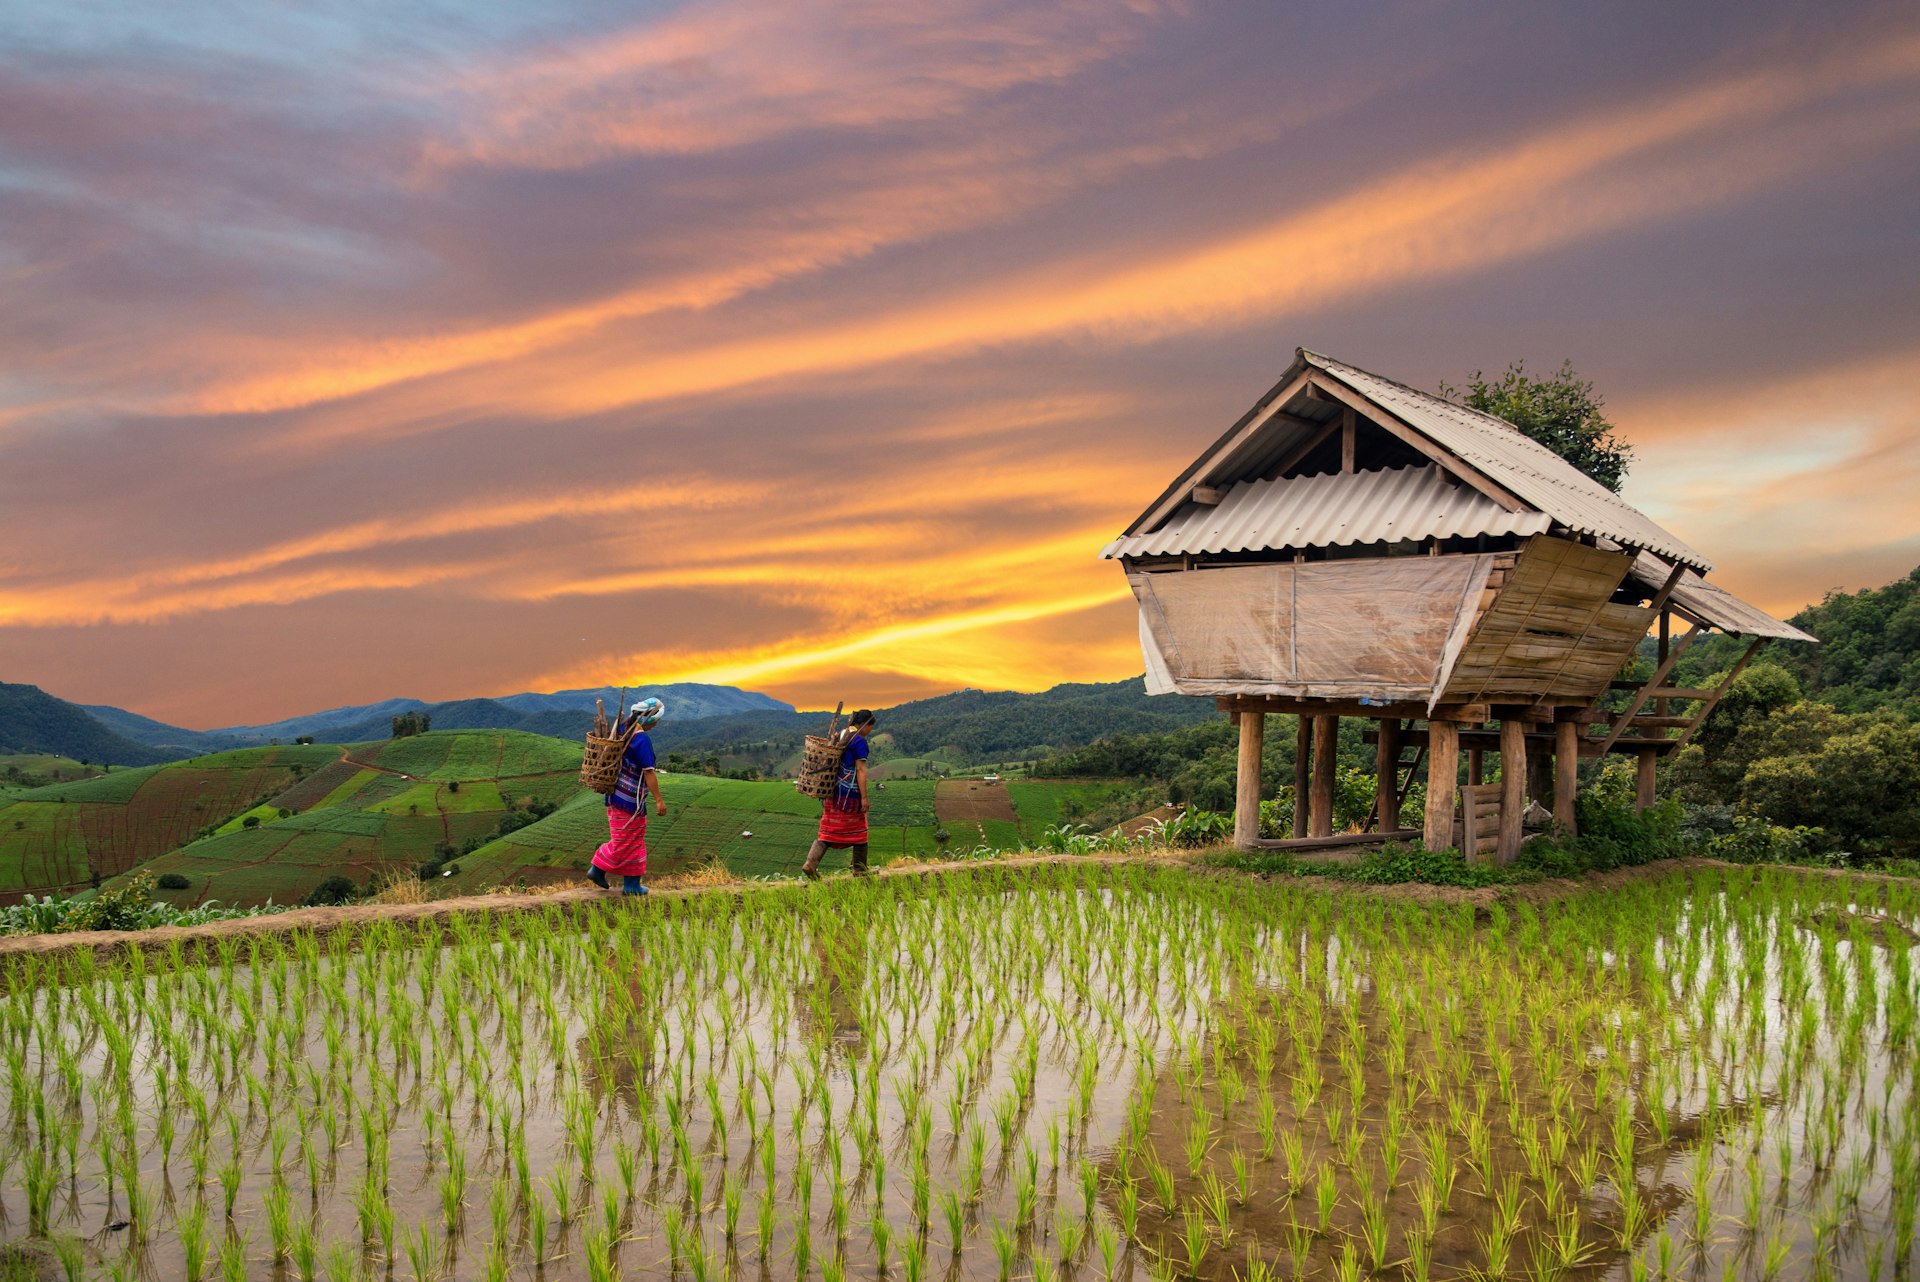 Hmong woman carrying loads on their backs with terrace rice fields in the background, Chiang Mai, Thailand. 